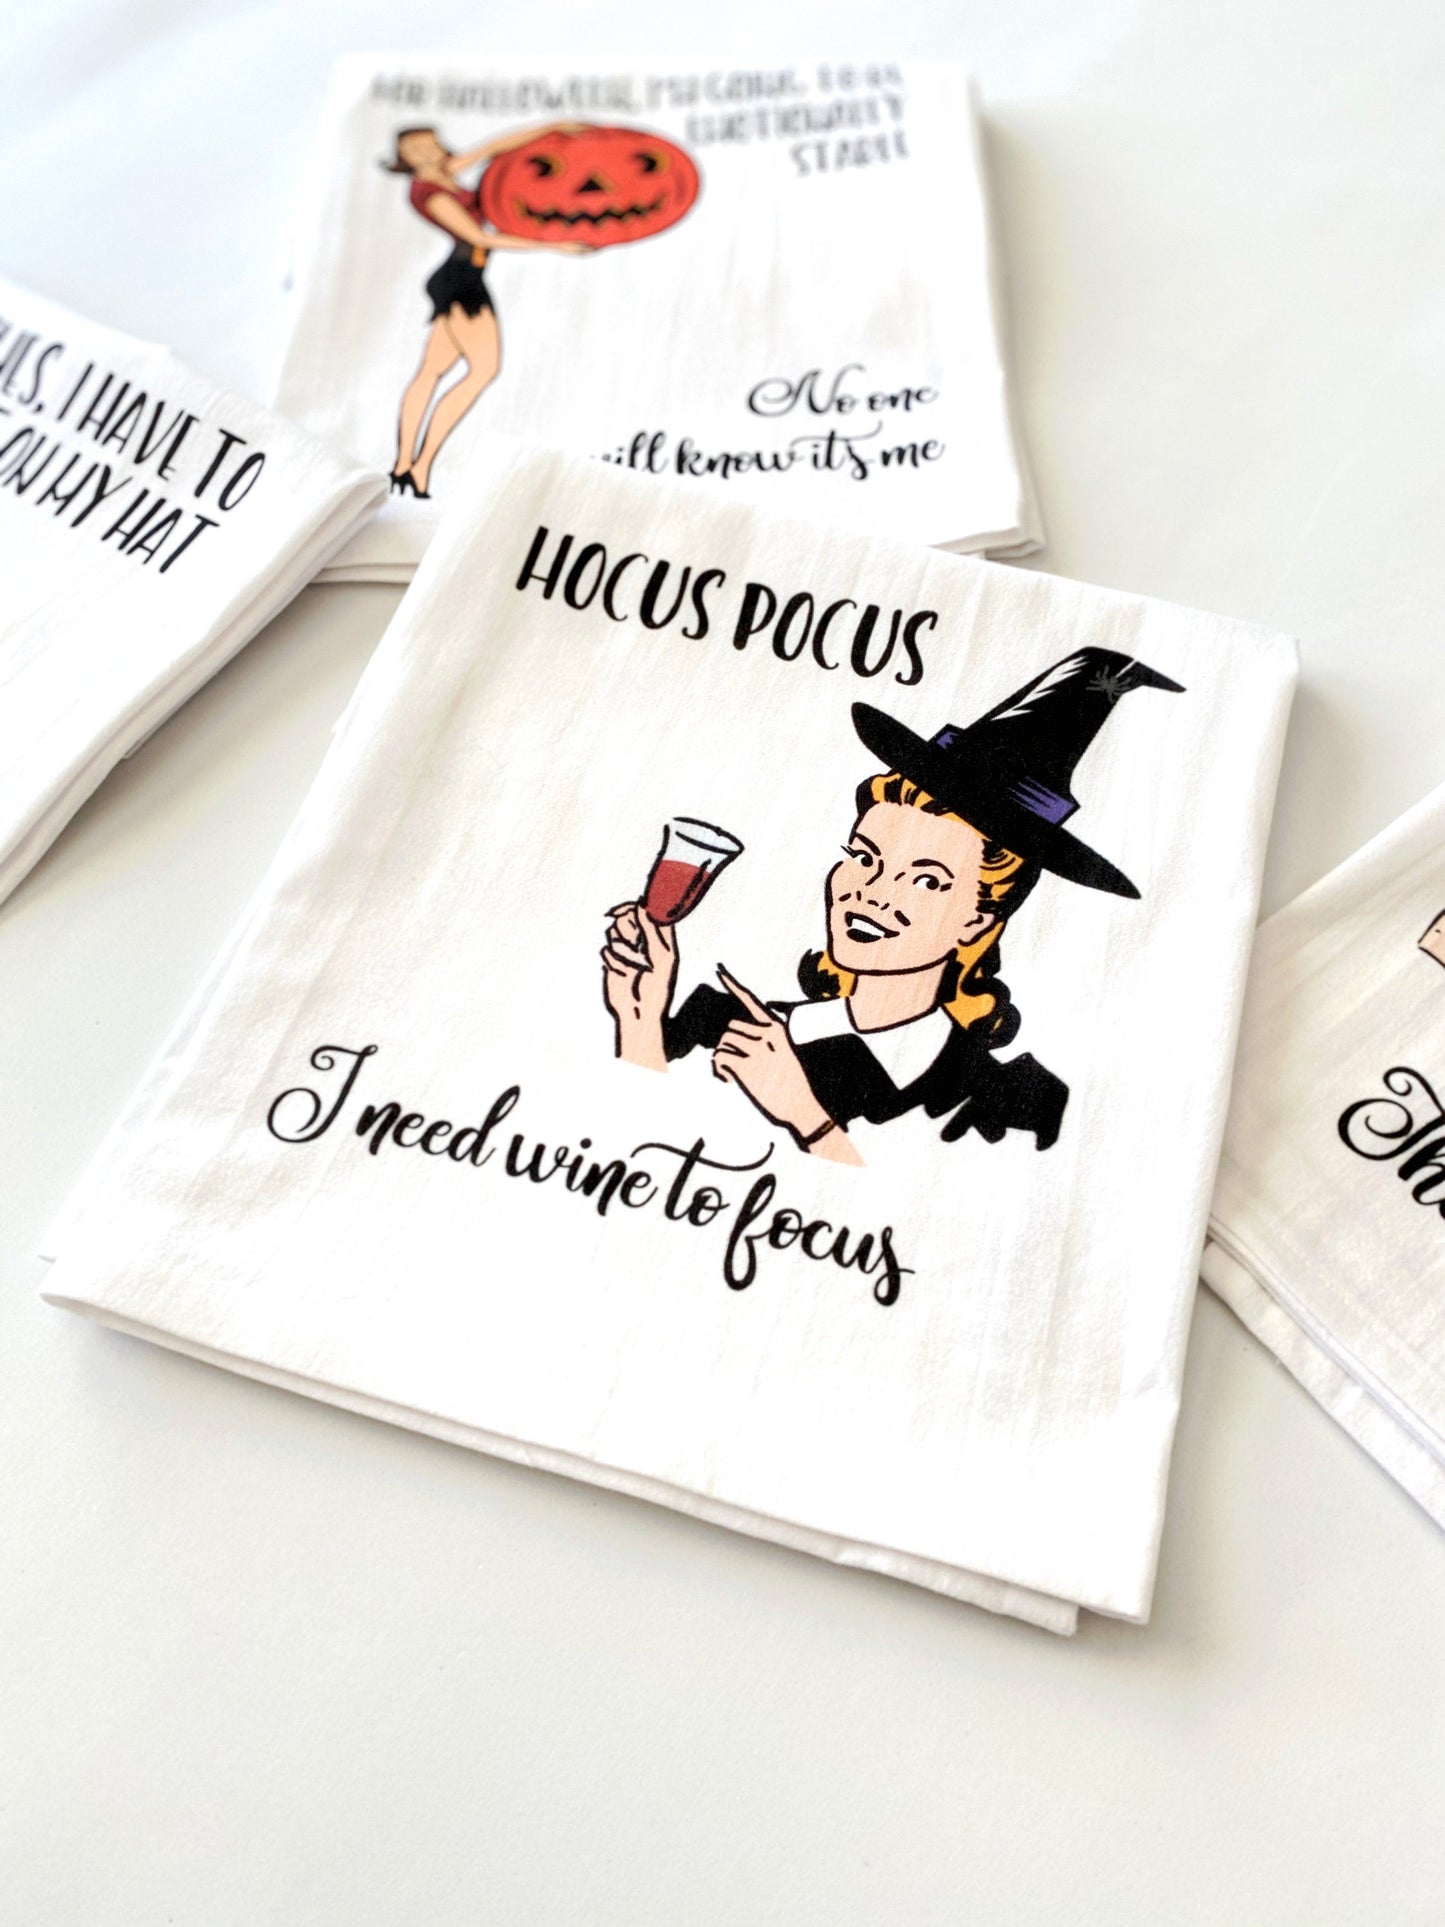 WITTY WOMEN FLOUR SACK DISH TOWELS – The Mad Padder